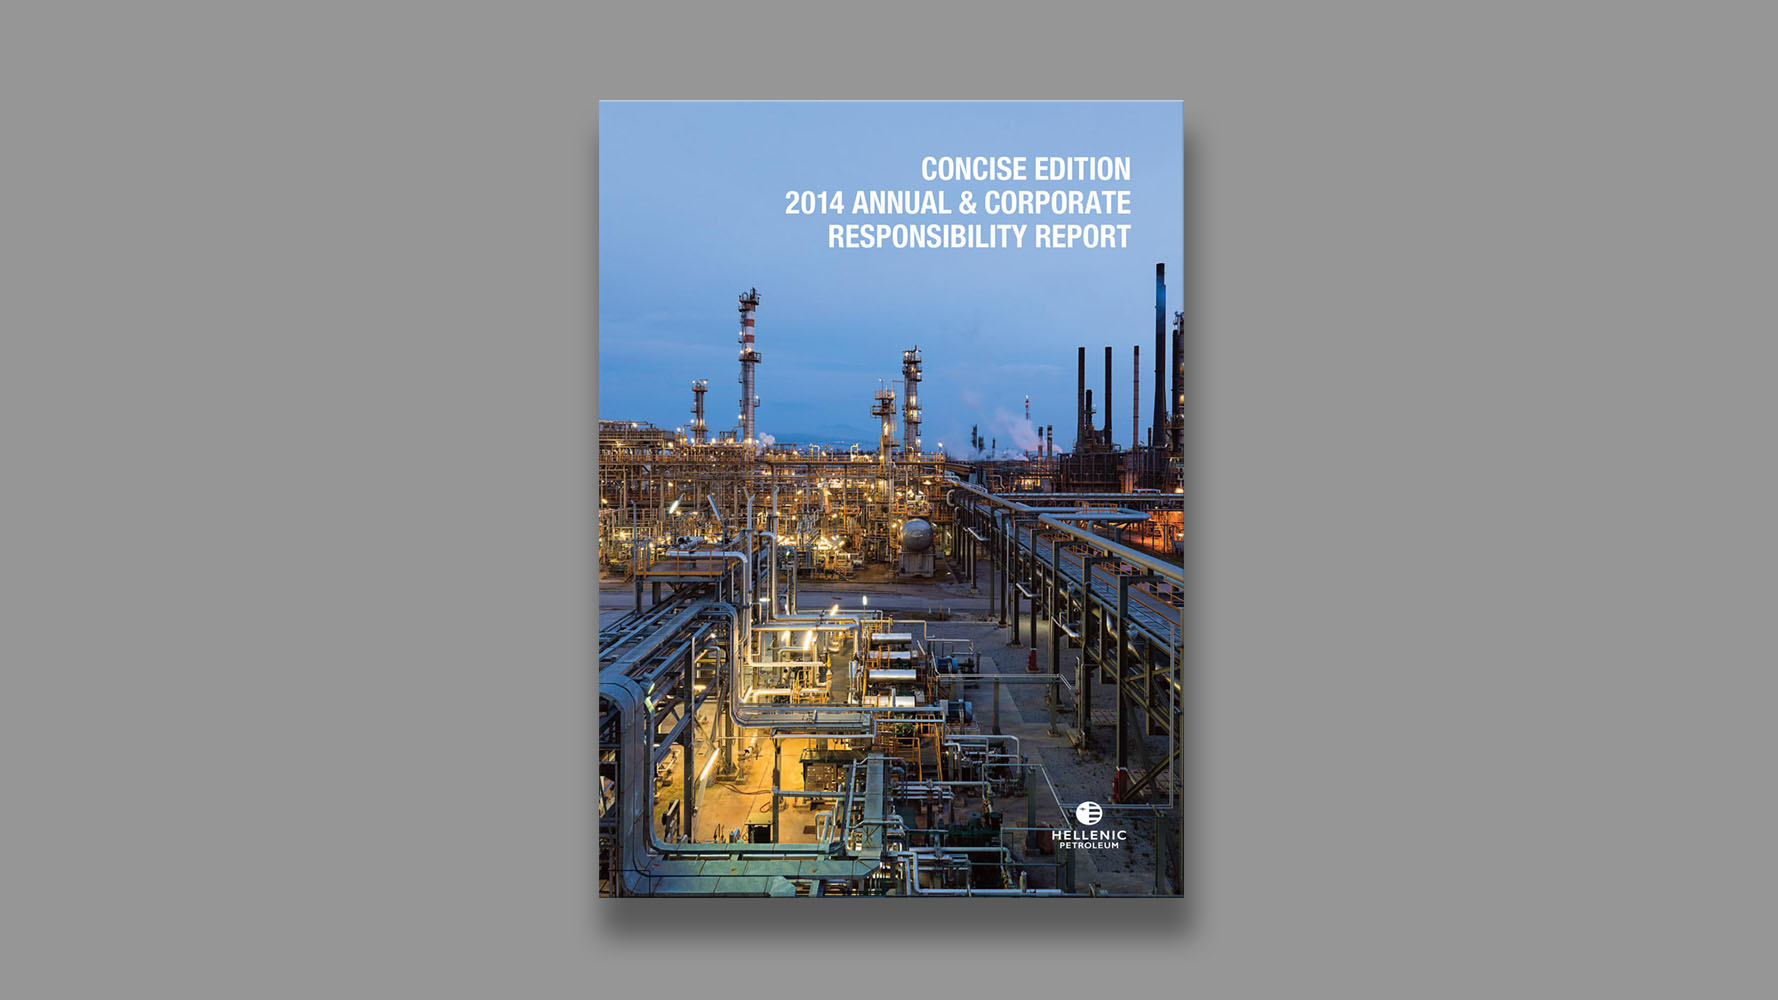 Concise Edition Annual Report & Corporate Responsibility Report, 2014